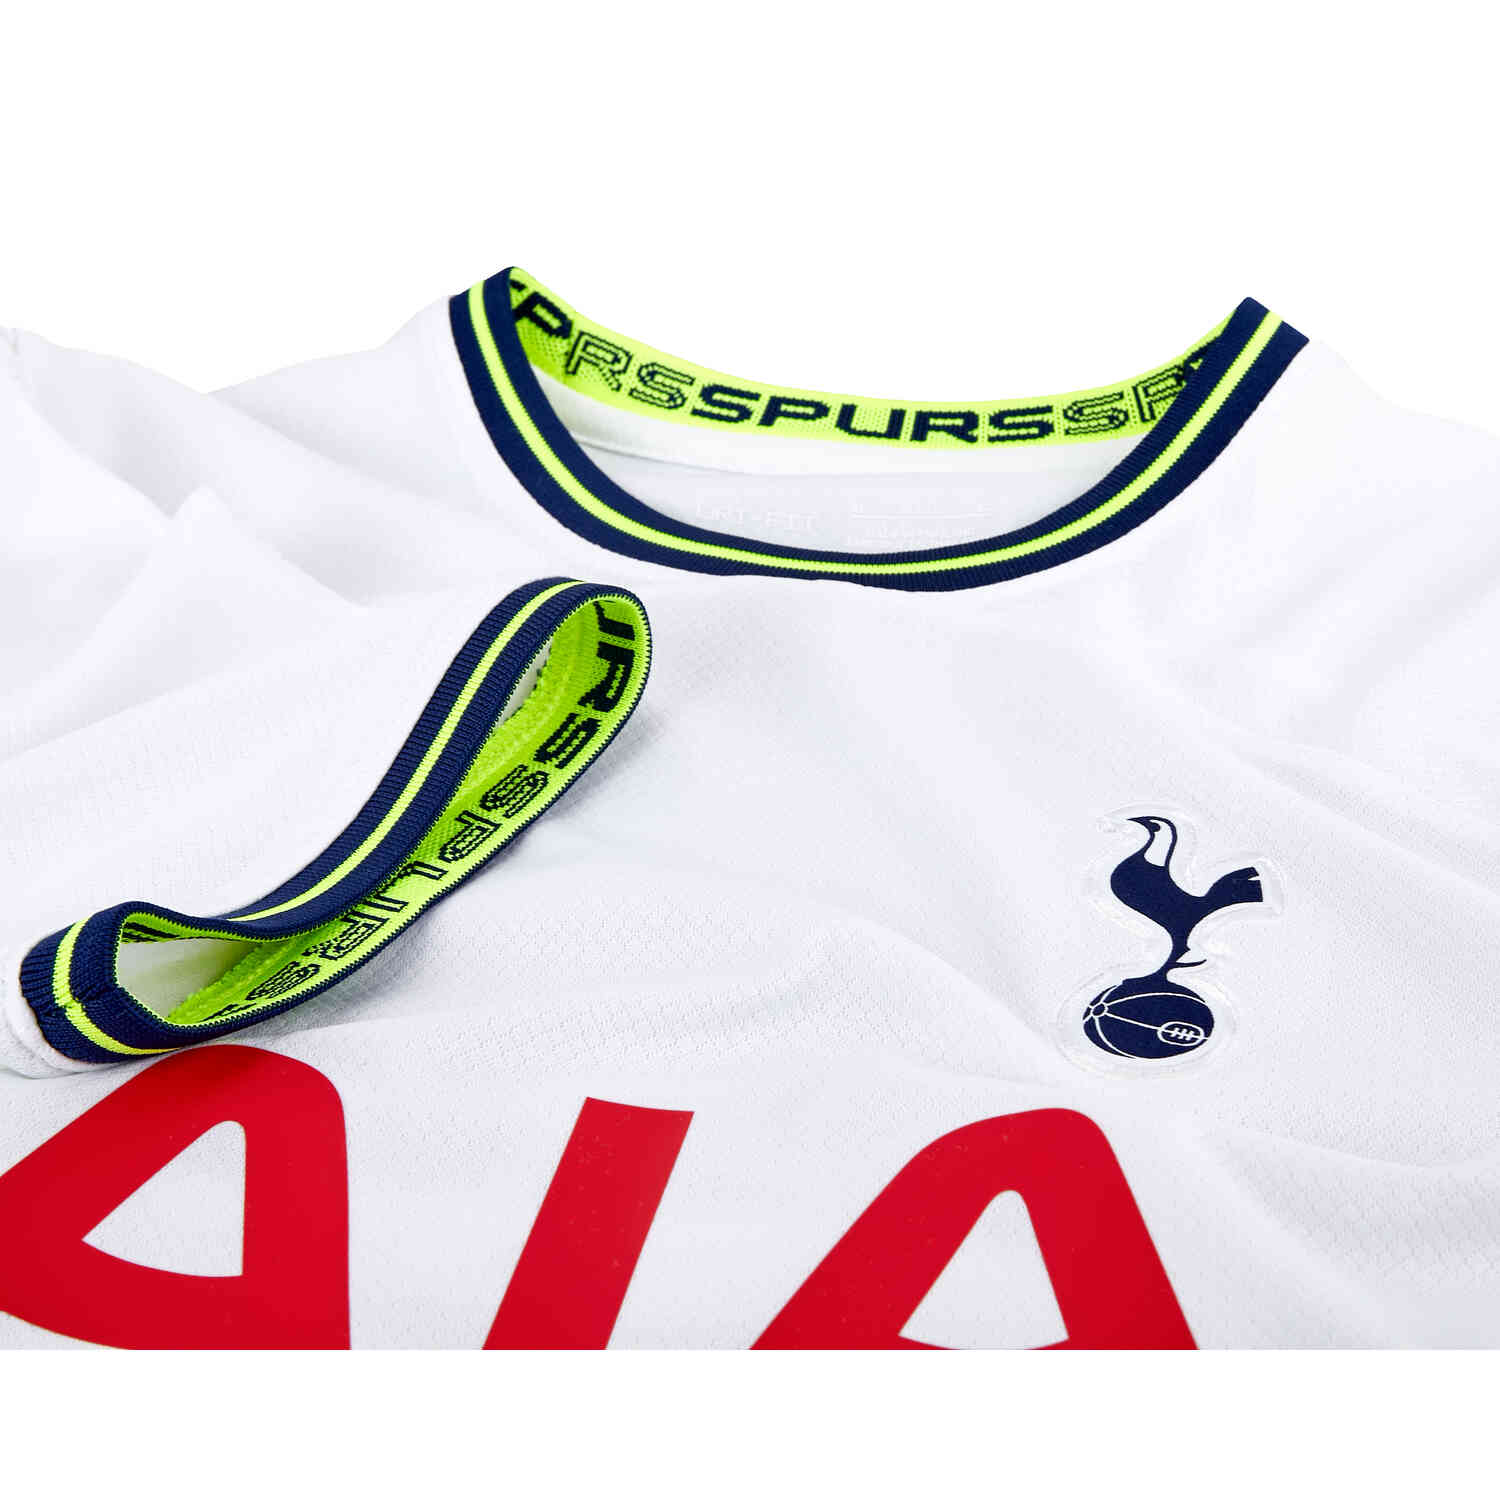 New Tottenham Jersey 2022-2023, Spurs Home Kit 22-23 by Nike